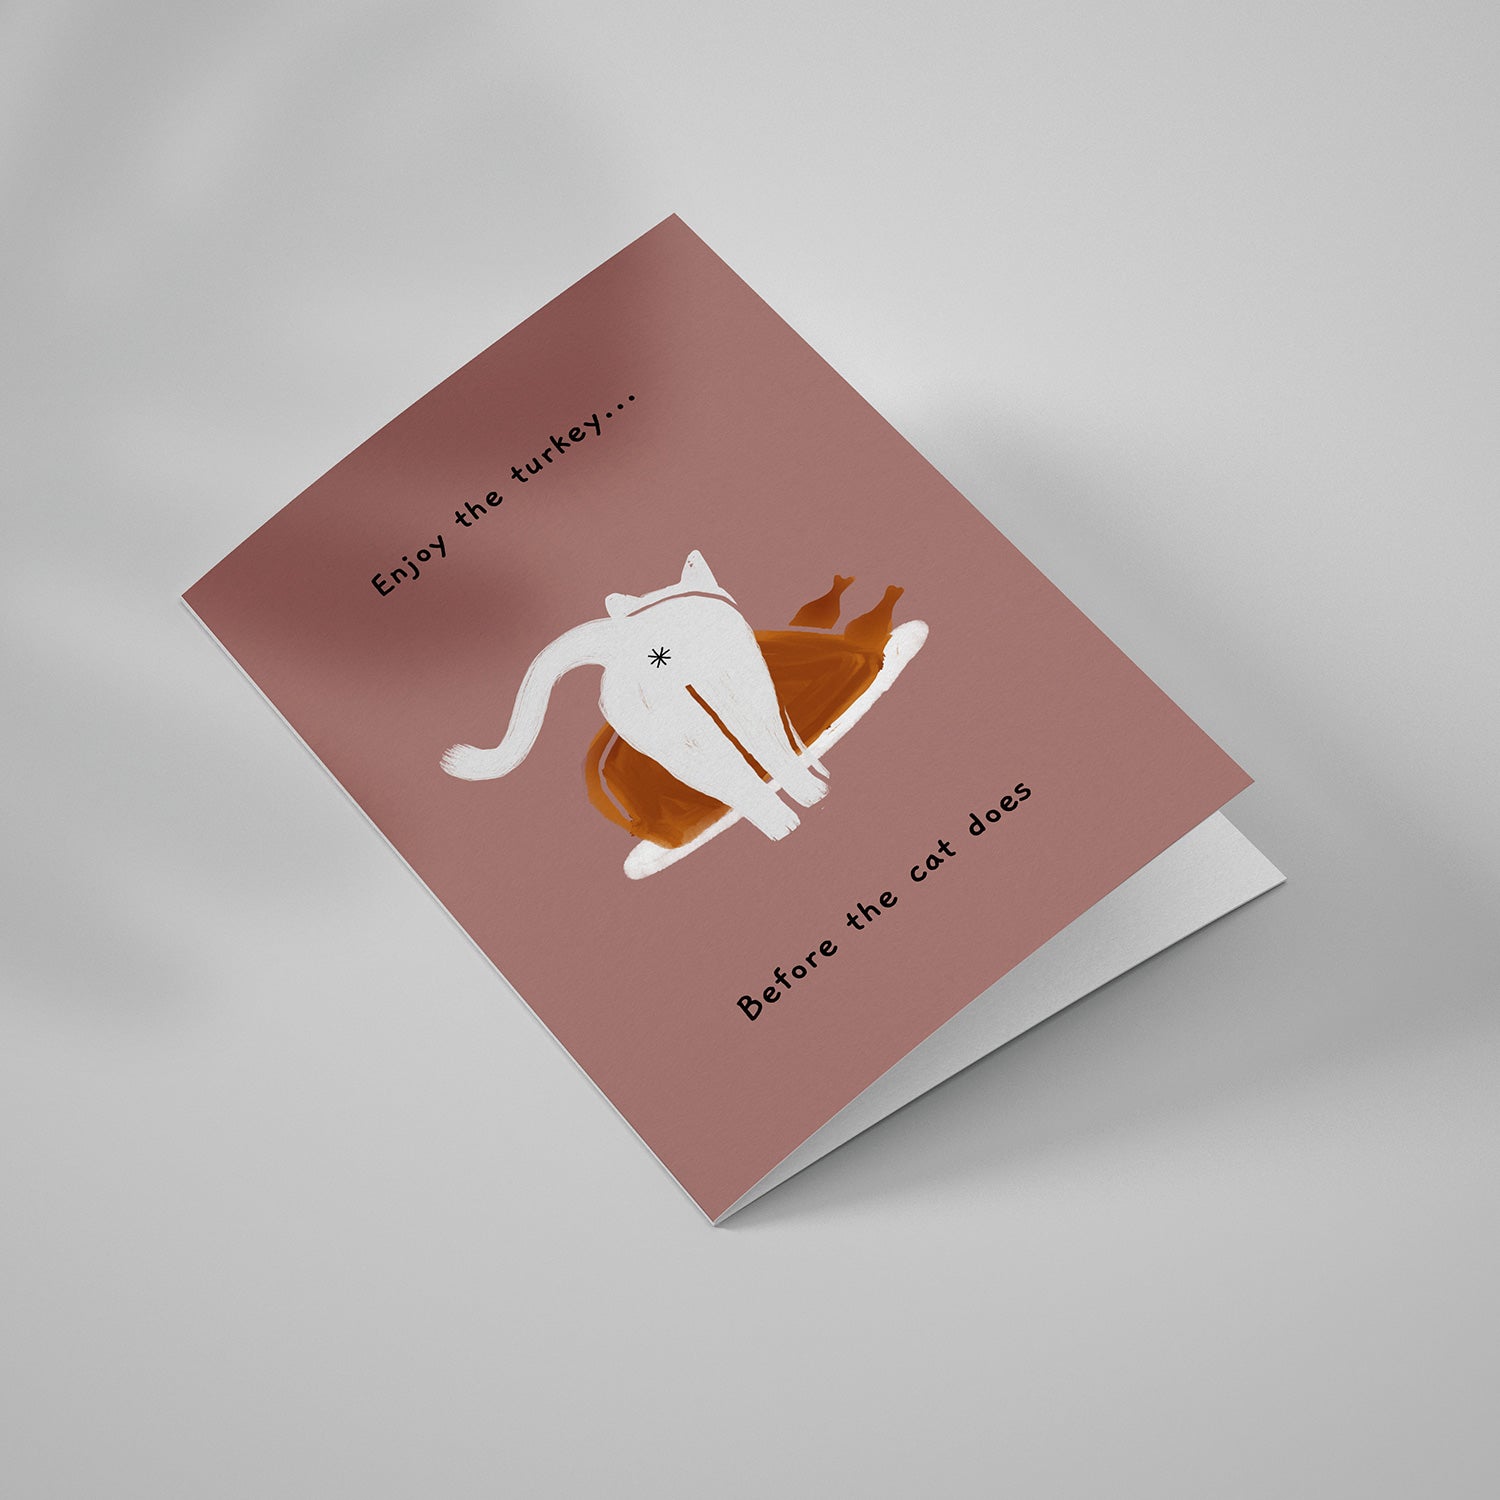 Ken the Cat funny Christmas card for cat lovers - enjoy they turkey before the cat does